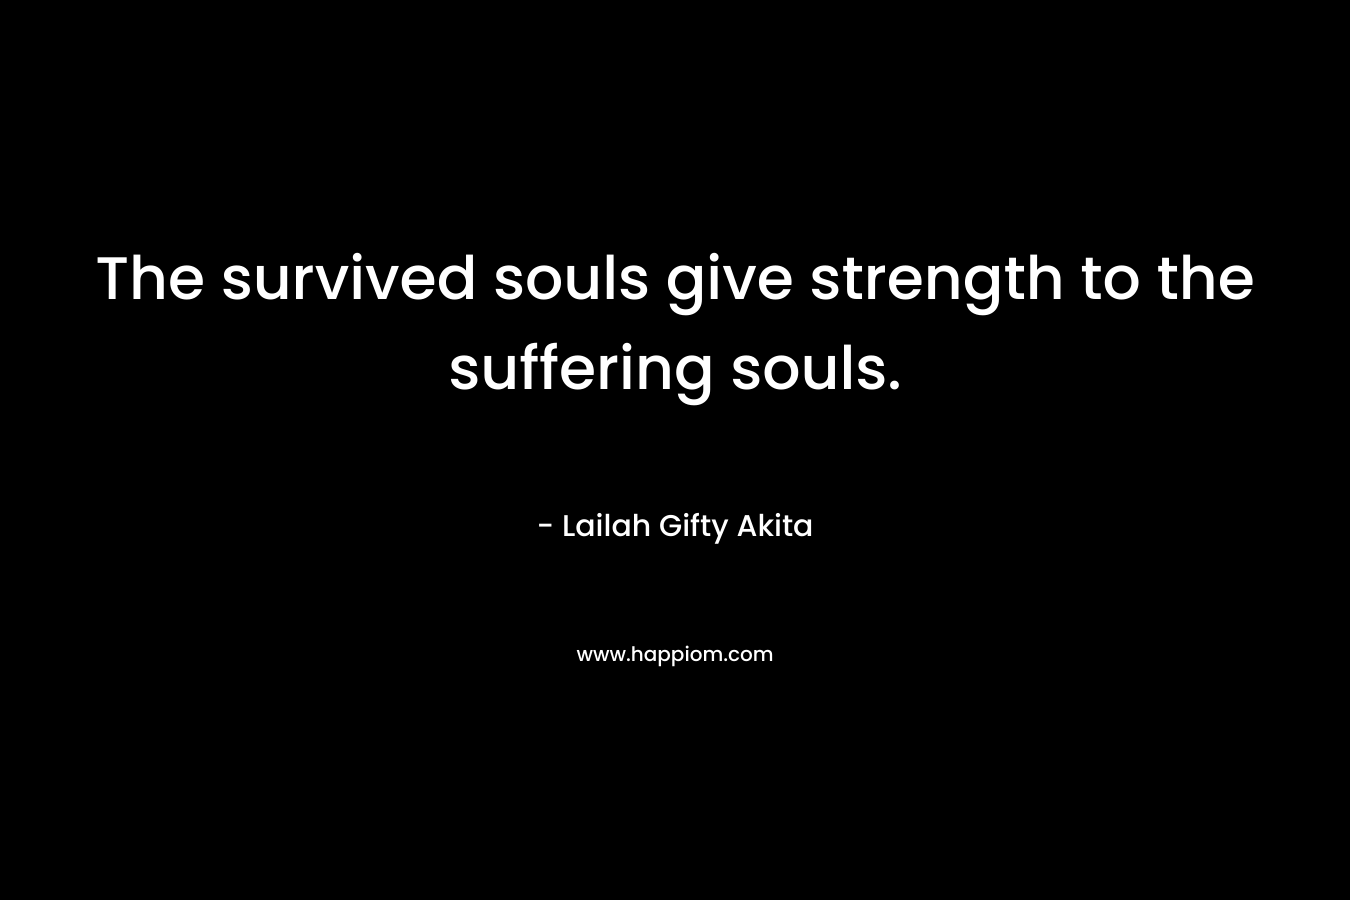 The survived souls give strength to the suffering souls.